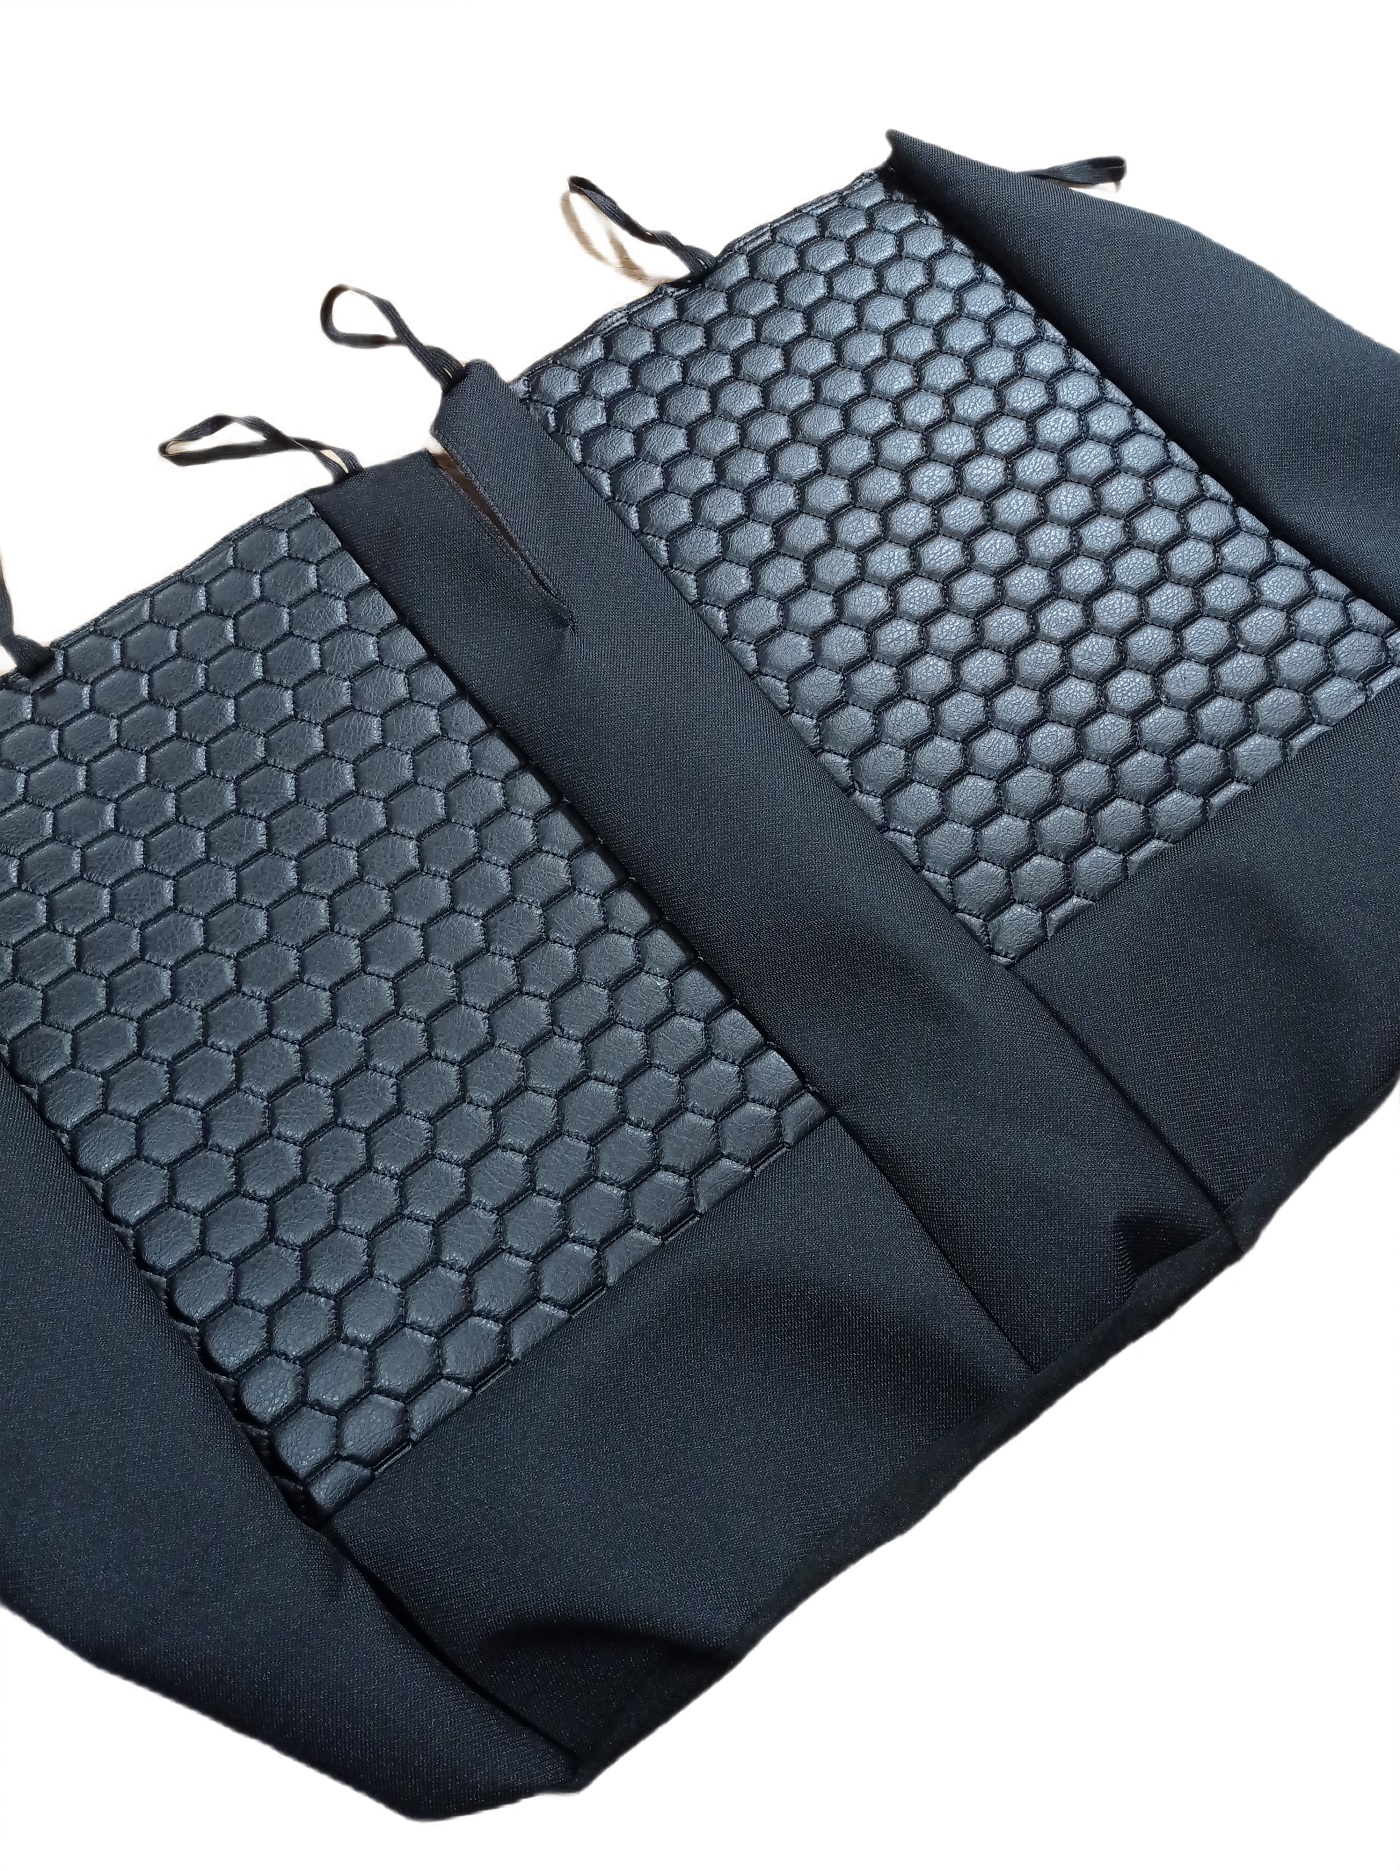 Seat covers for MERCEDES SPRINTER Van Black Leather